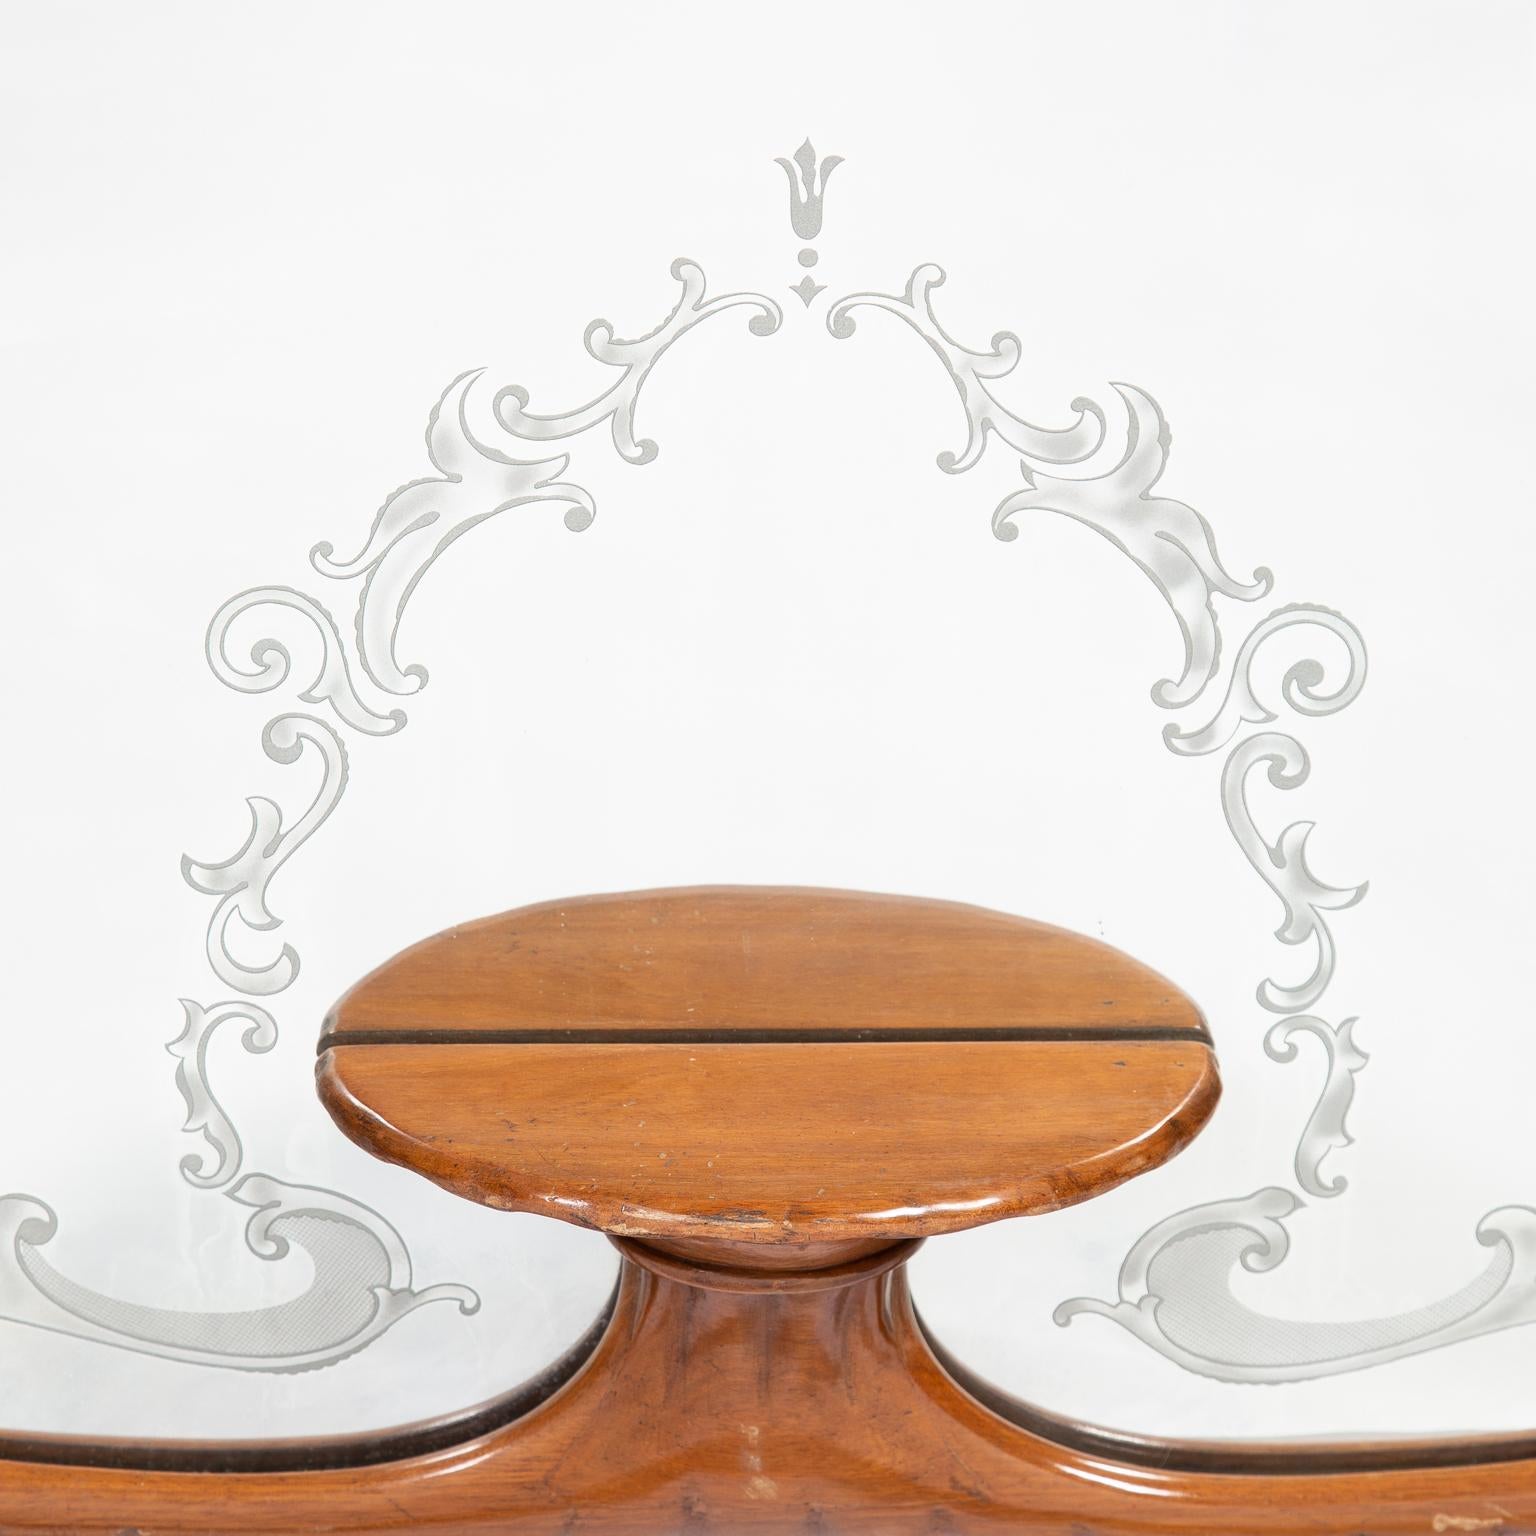 Mahogany frame mirror with scallop shaping incorporating a small lower centre shelf. The mirror glass features a border with an etched scrollwork design.